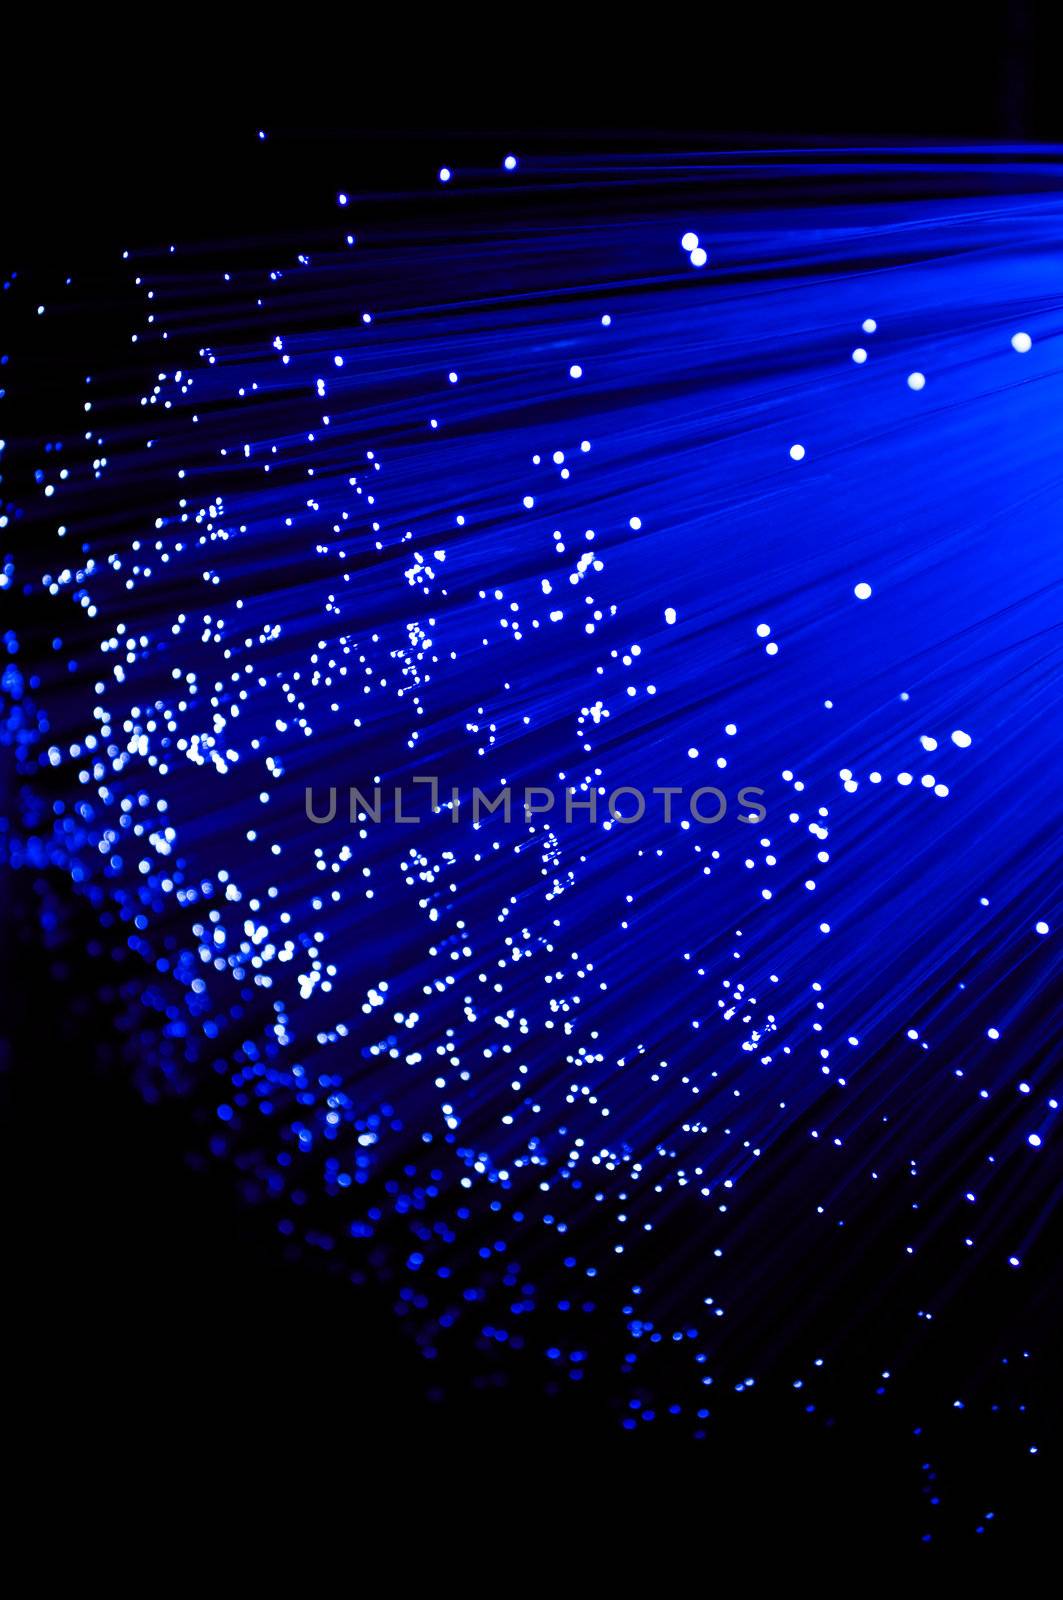 Close up on ends of many illuminated deep blue fibre optic strands with black background.